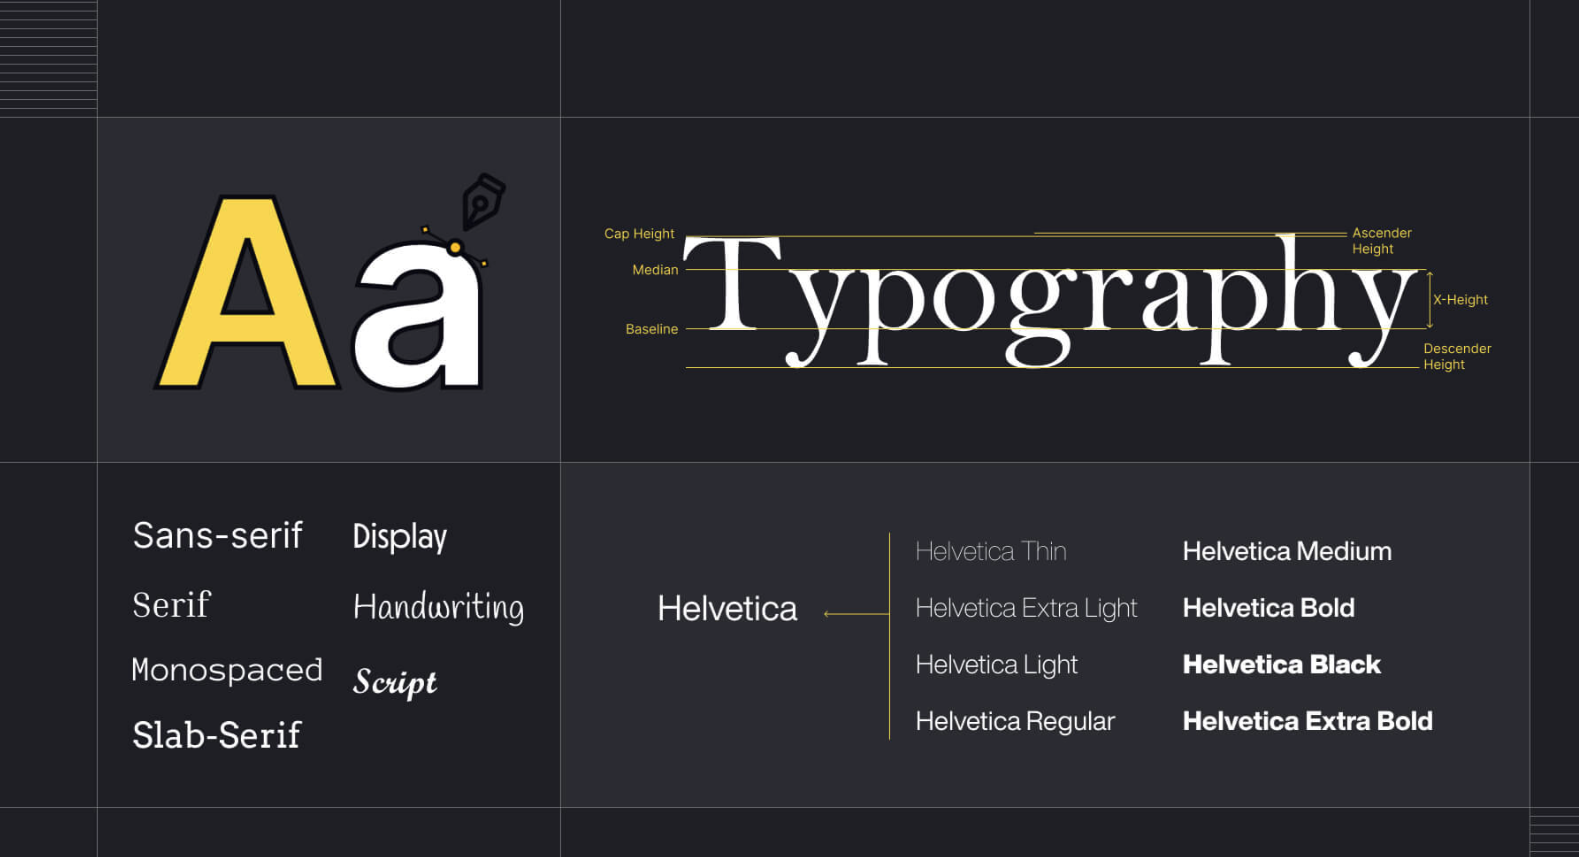 The Classification of Typeface Styles